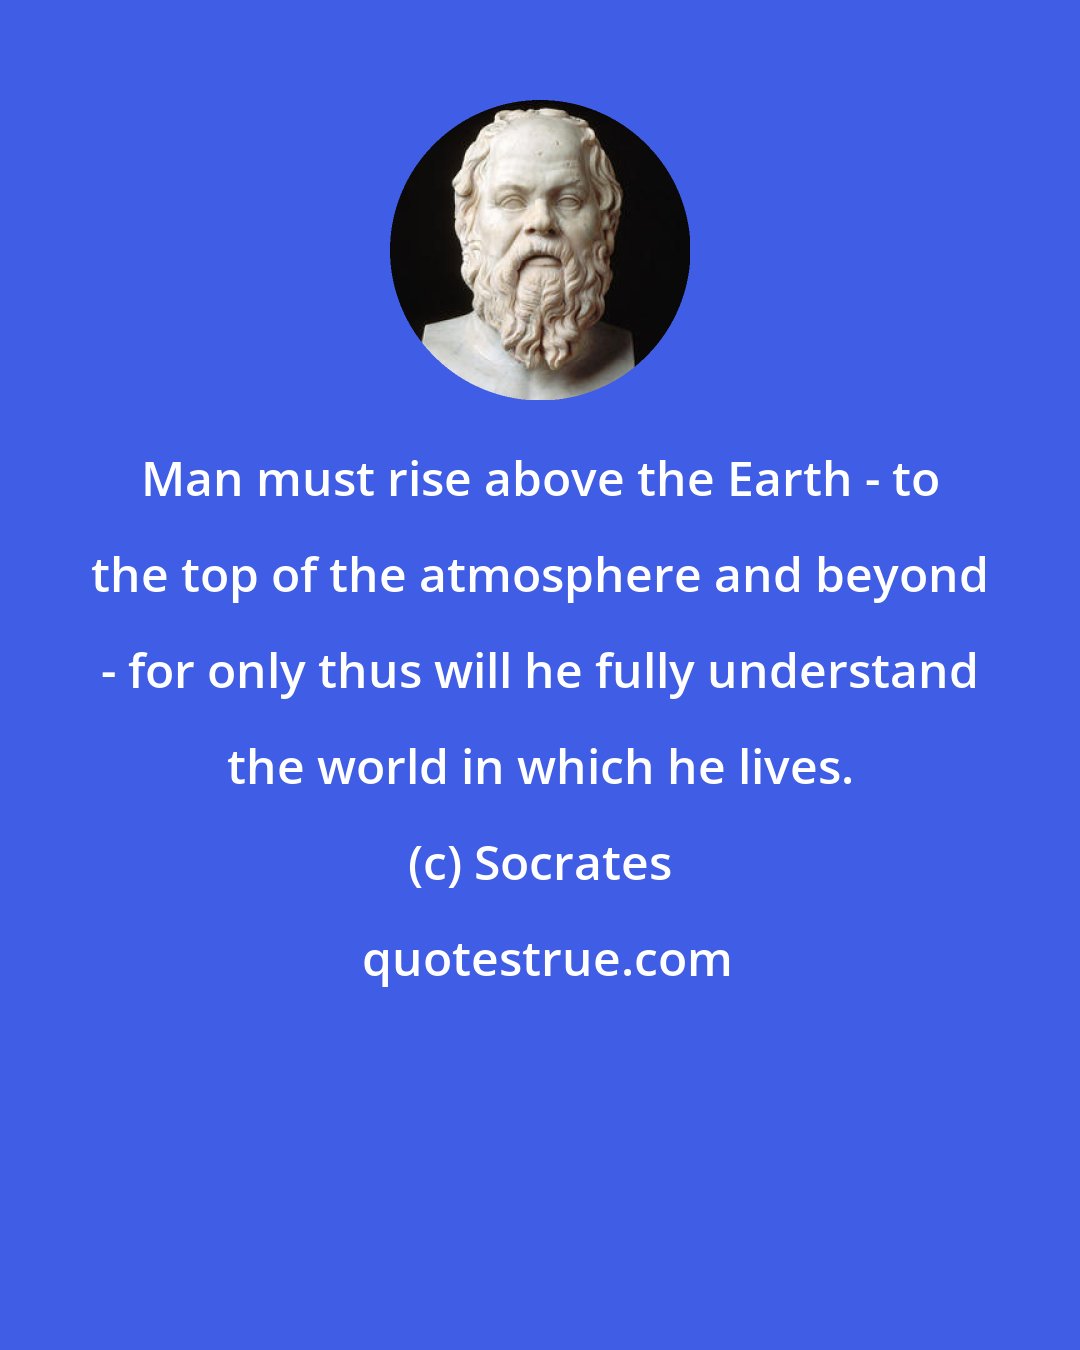 Socrates: Man must rise above the Earth - to the top of the atmosphere and beyond - for only thus will he fully understand the world in which he lives.